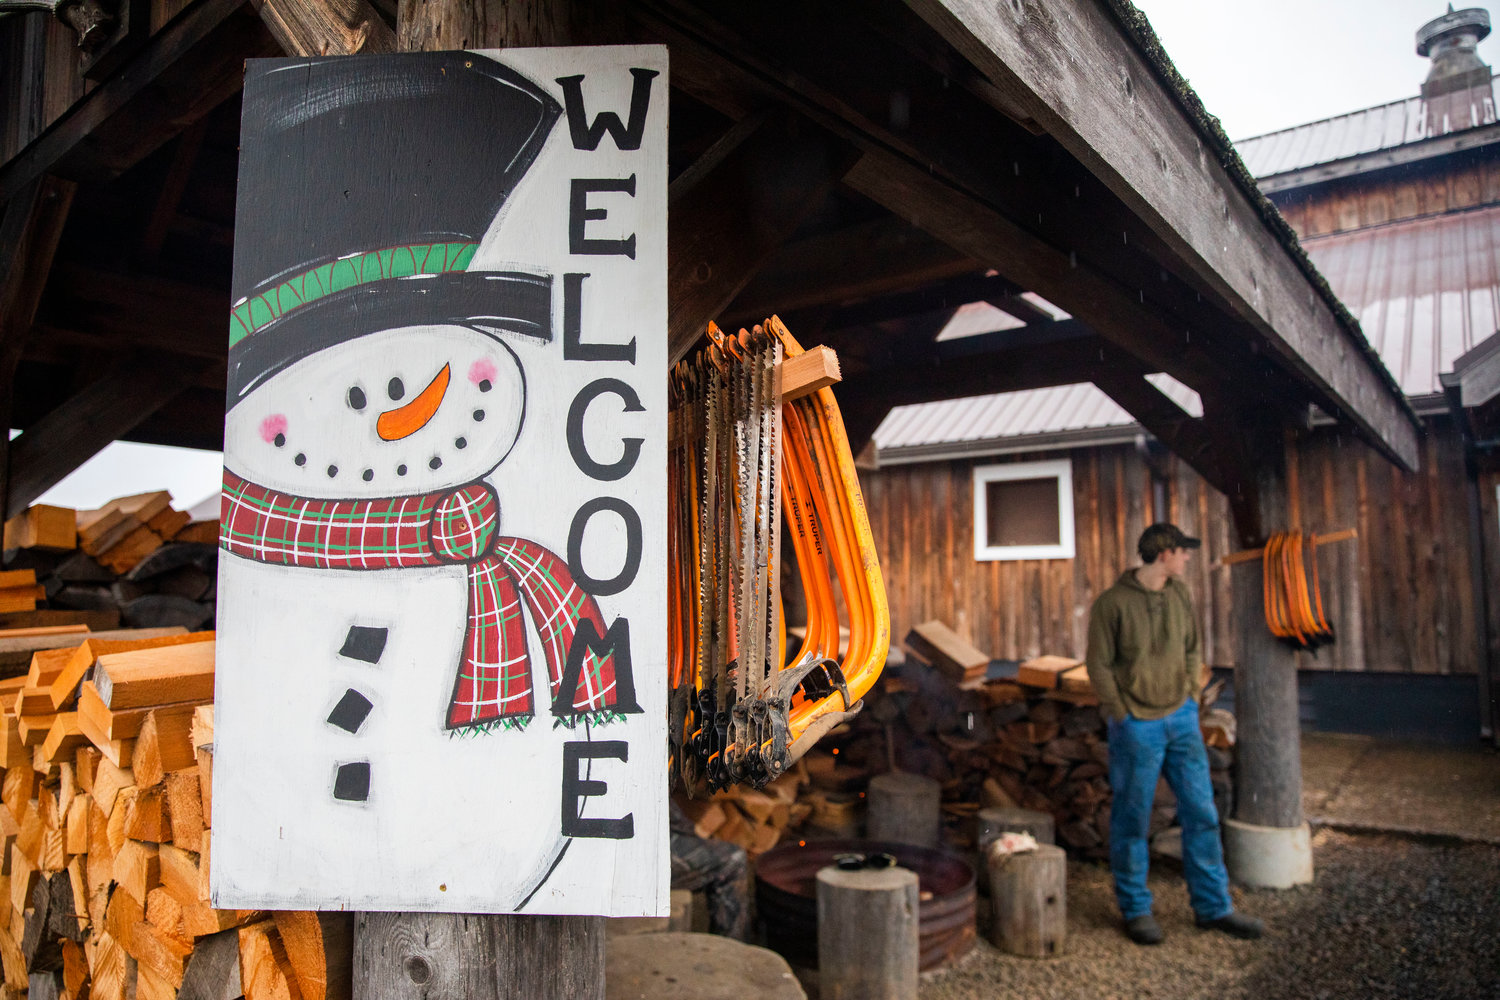 Saws hang next to a sign that welcomes visitors to the Mistletoe Tree Farm on Friday.